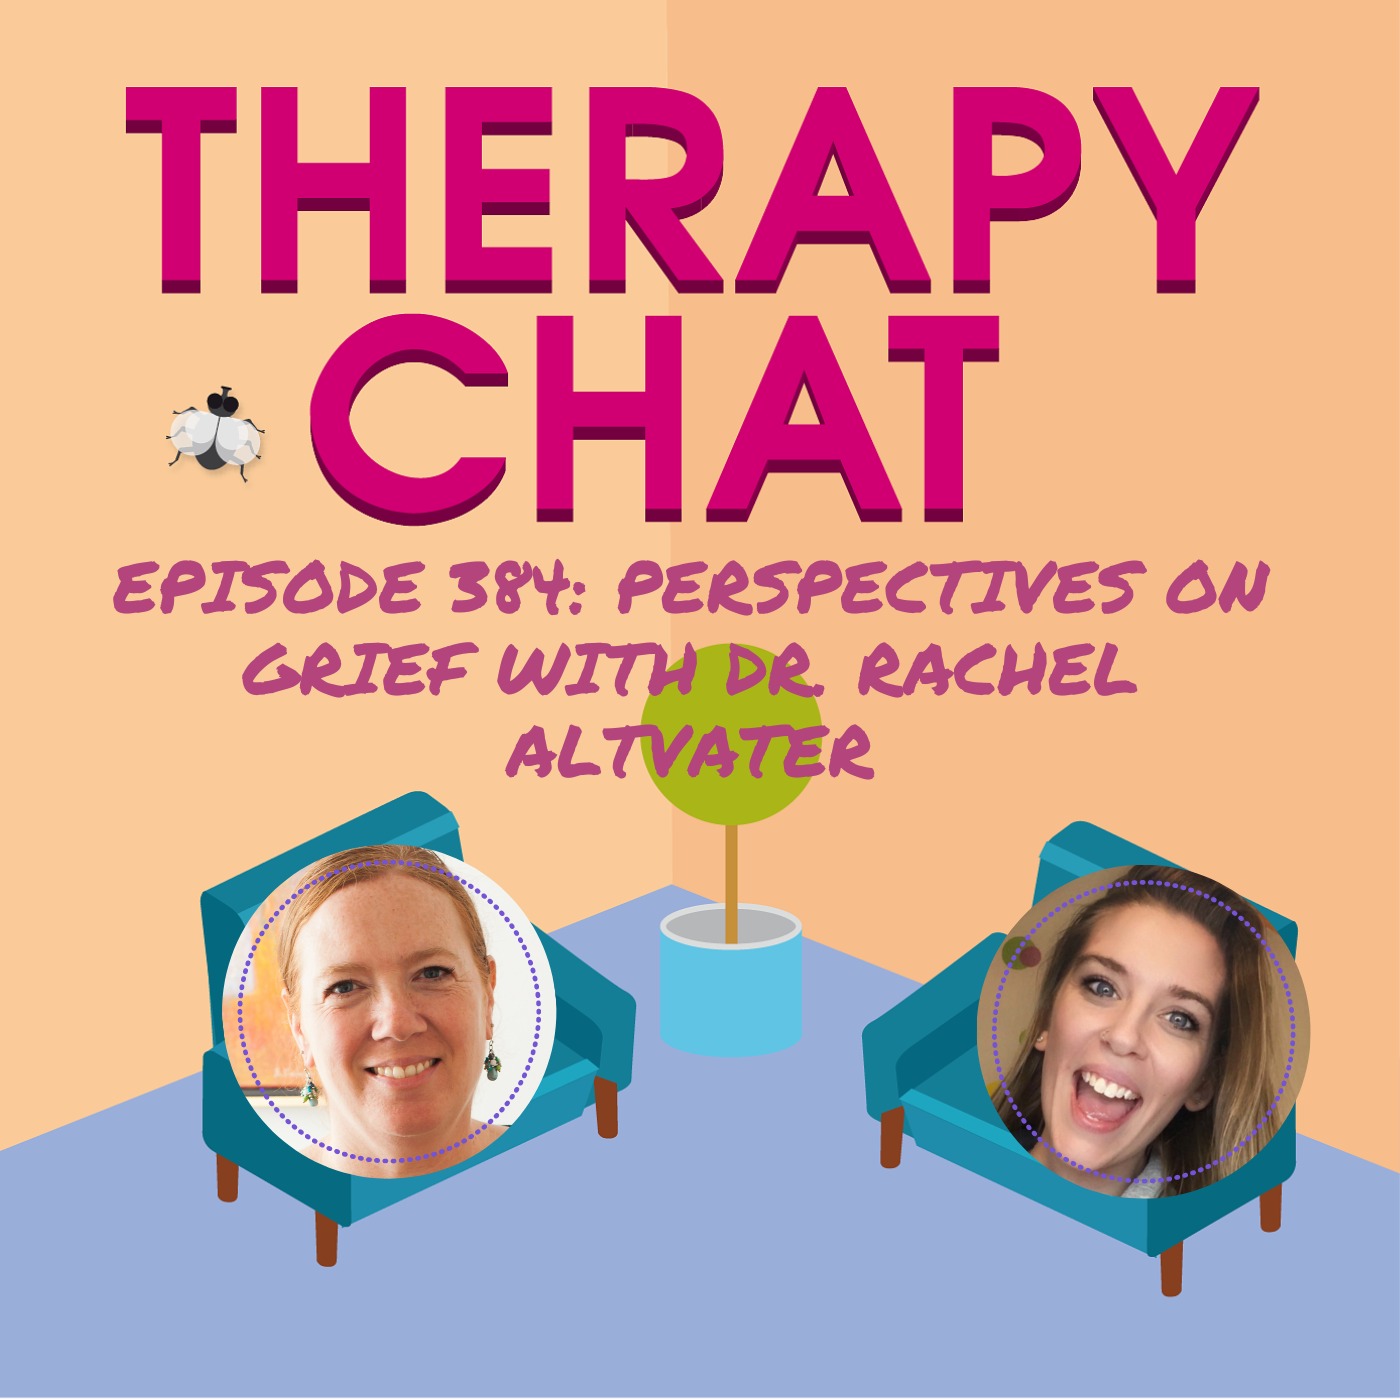 384: Perspectives On Grief With Dr. Rachel Altvater